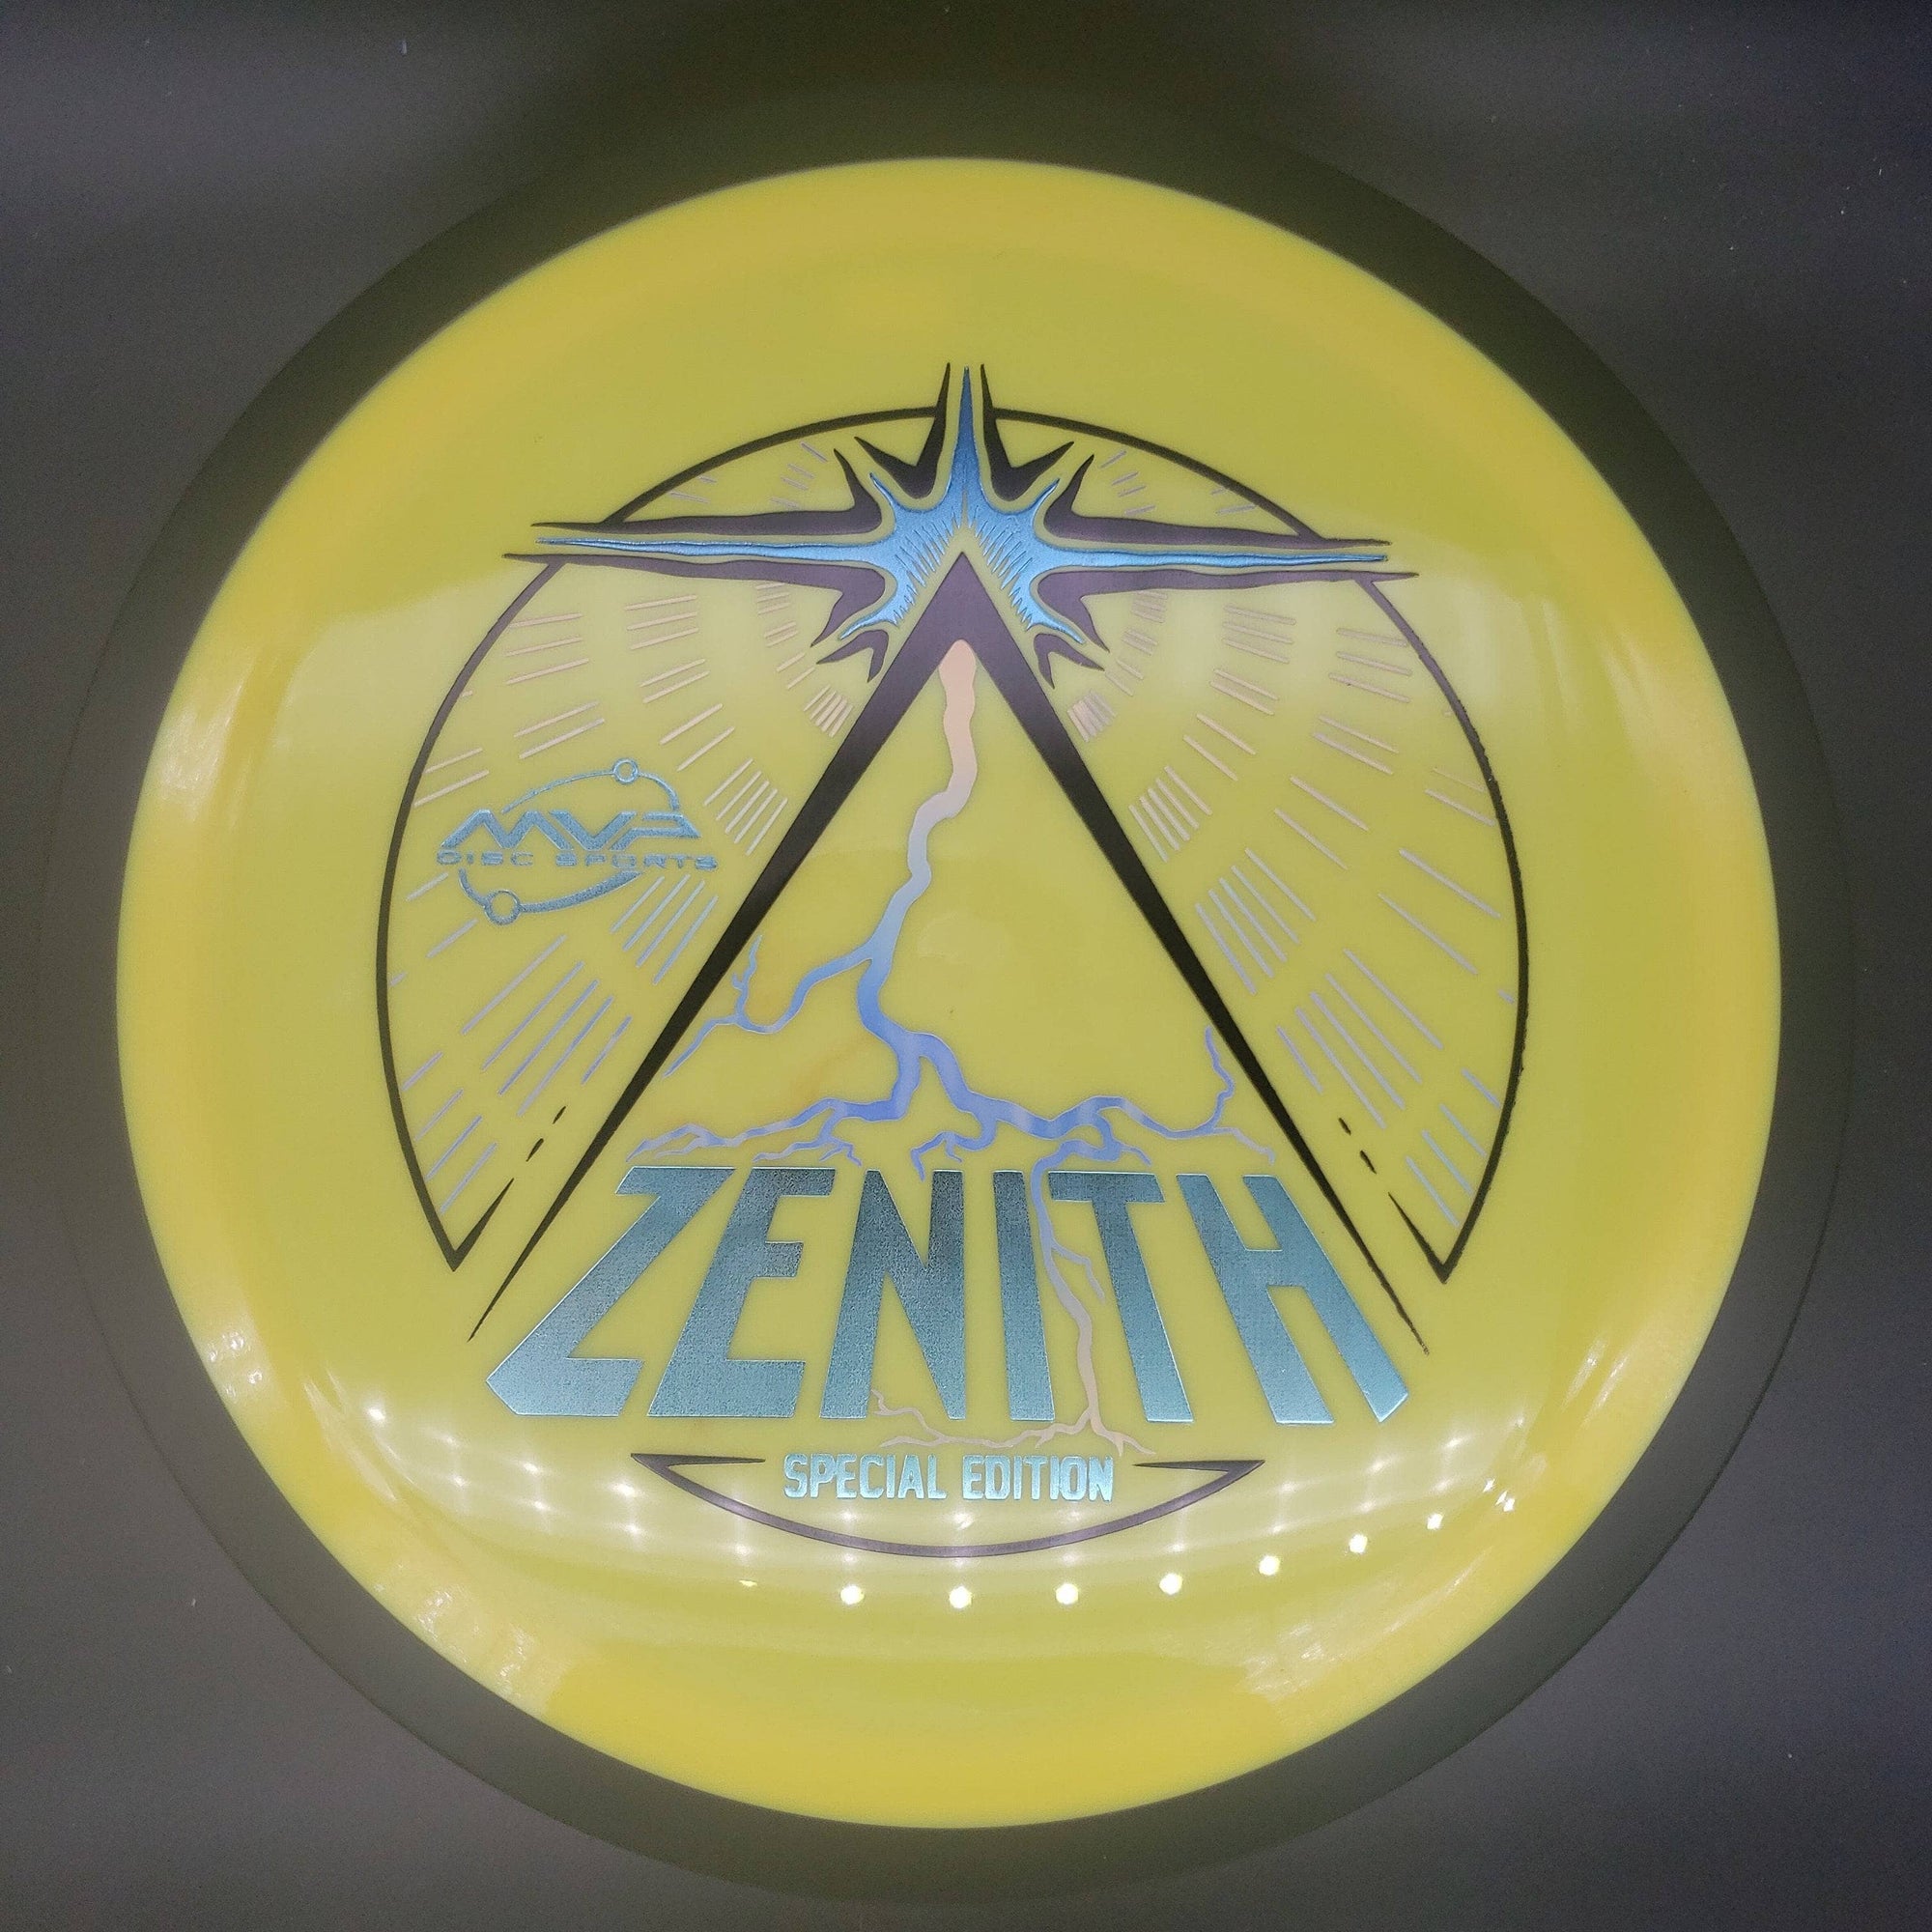 MVP Distance Driver Yellow Blue 172g Zenith, Special Edition